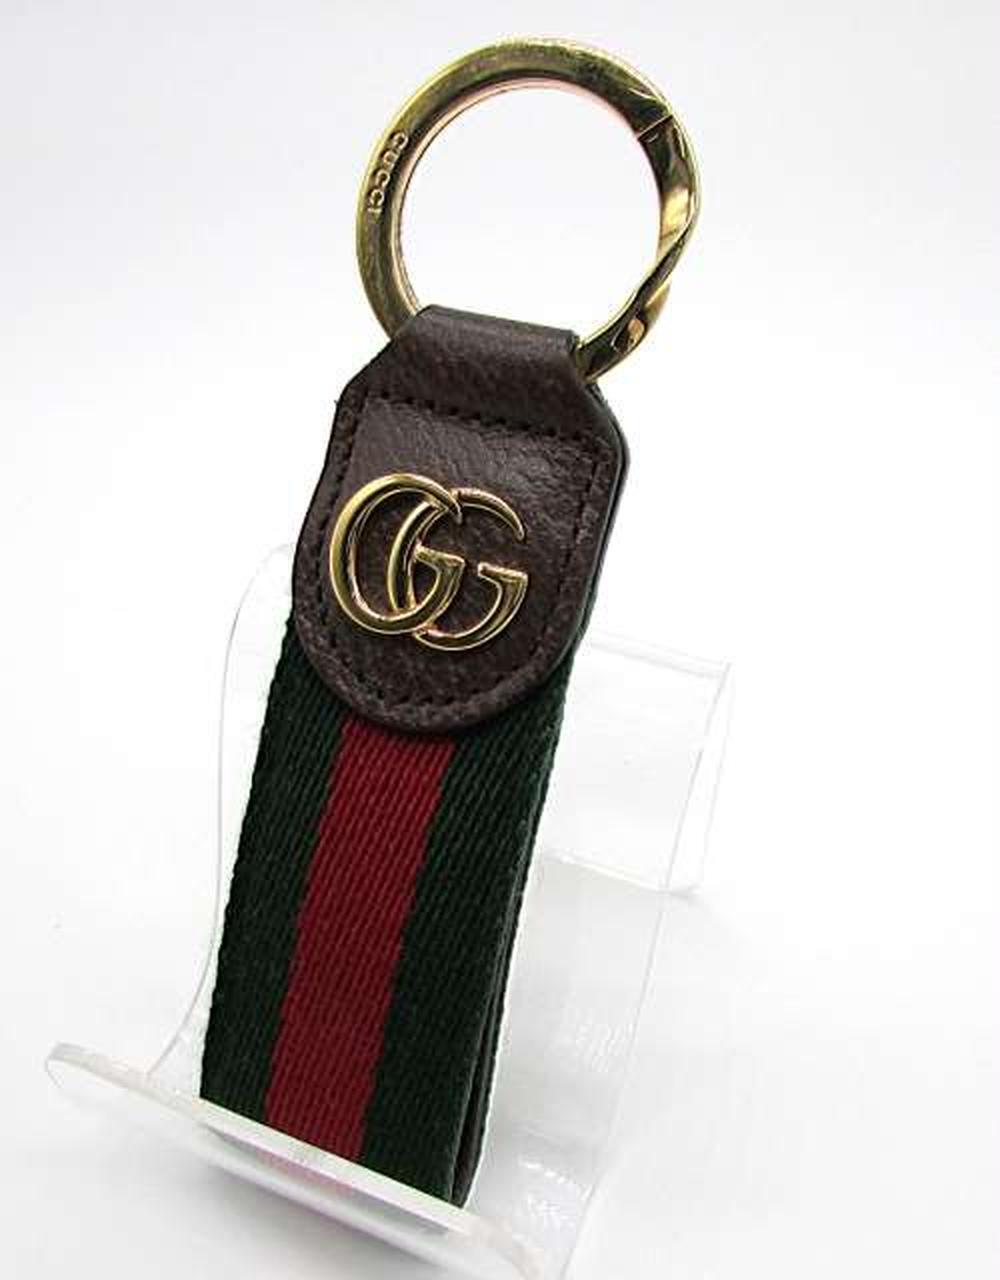 GUCCI 523161 479292 Ophidia Keychain From Japan